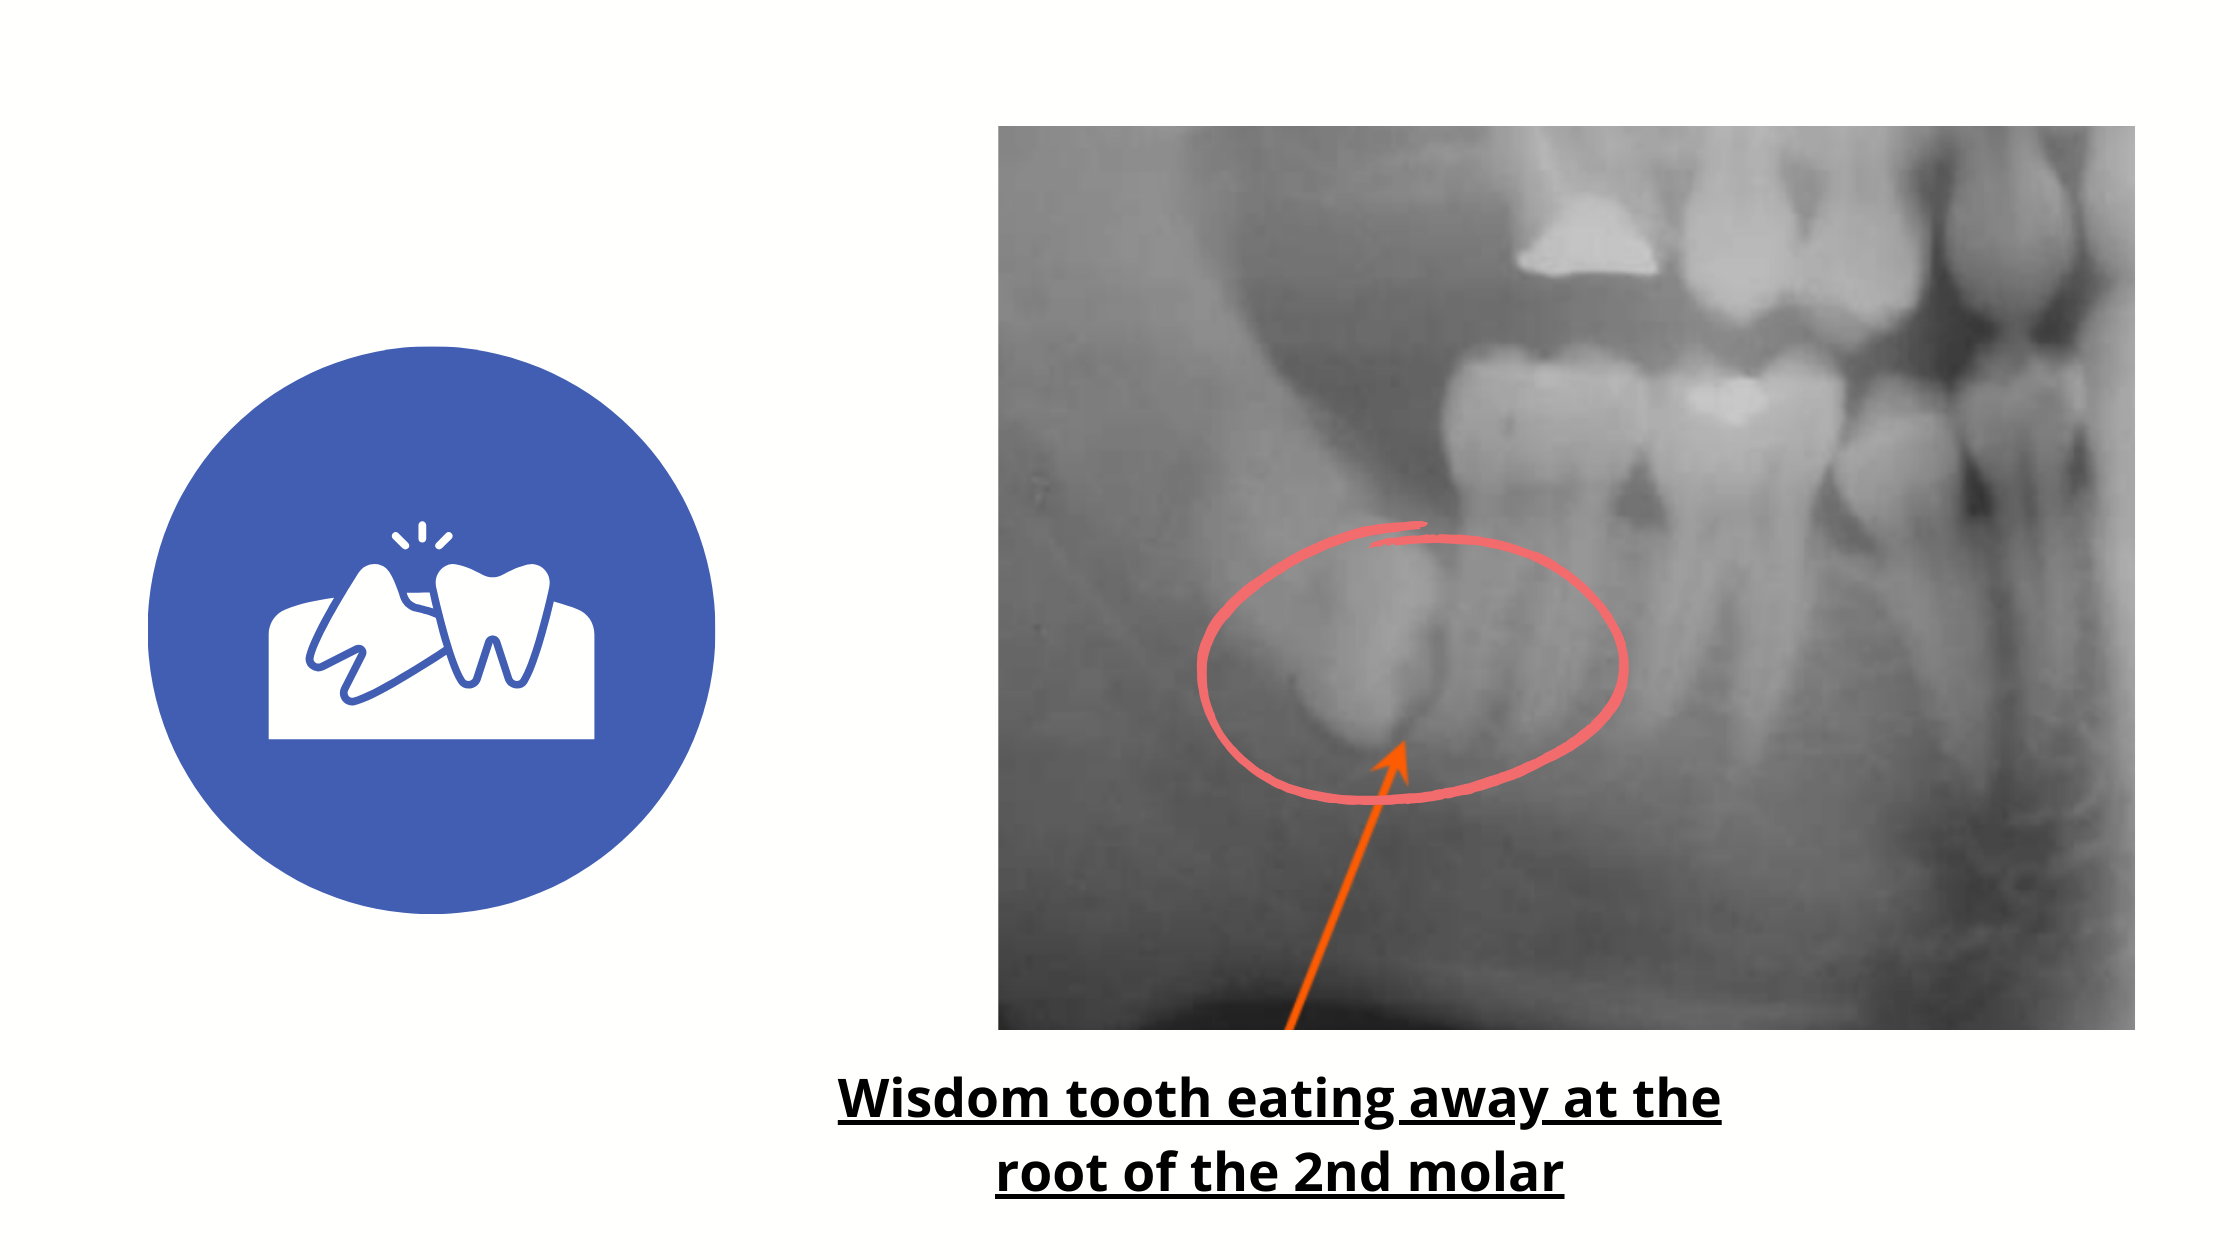 Wisdom tooth growing sideways, damaging the adjacent second molar, with x-rays